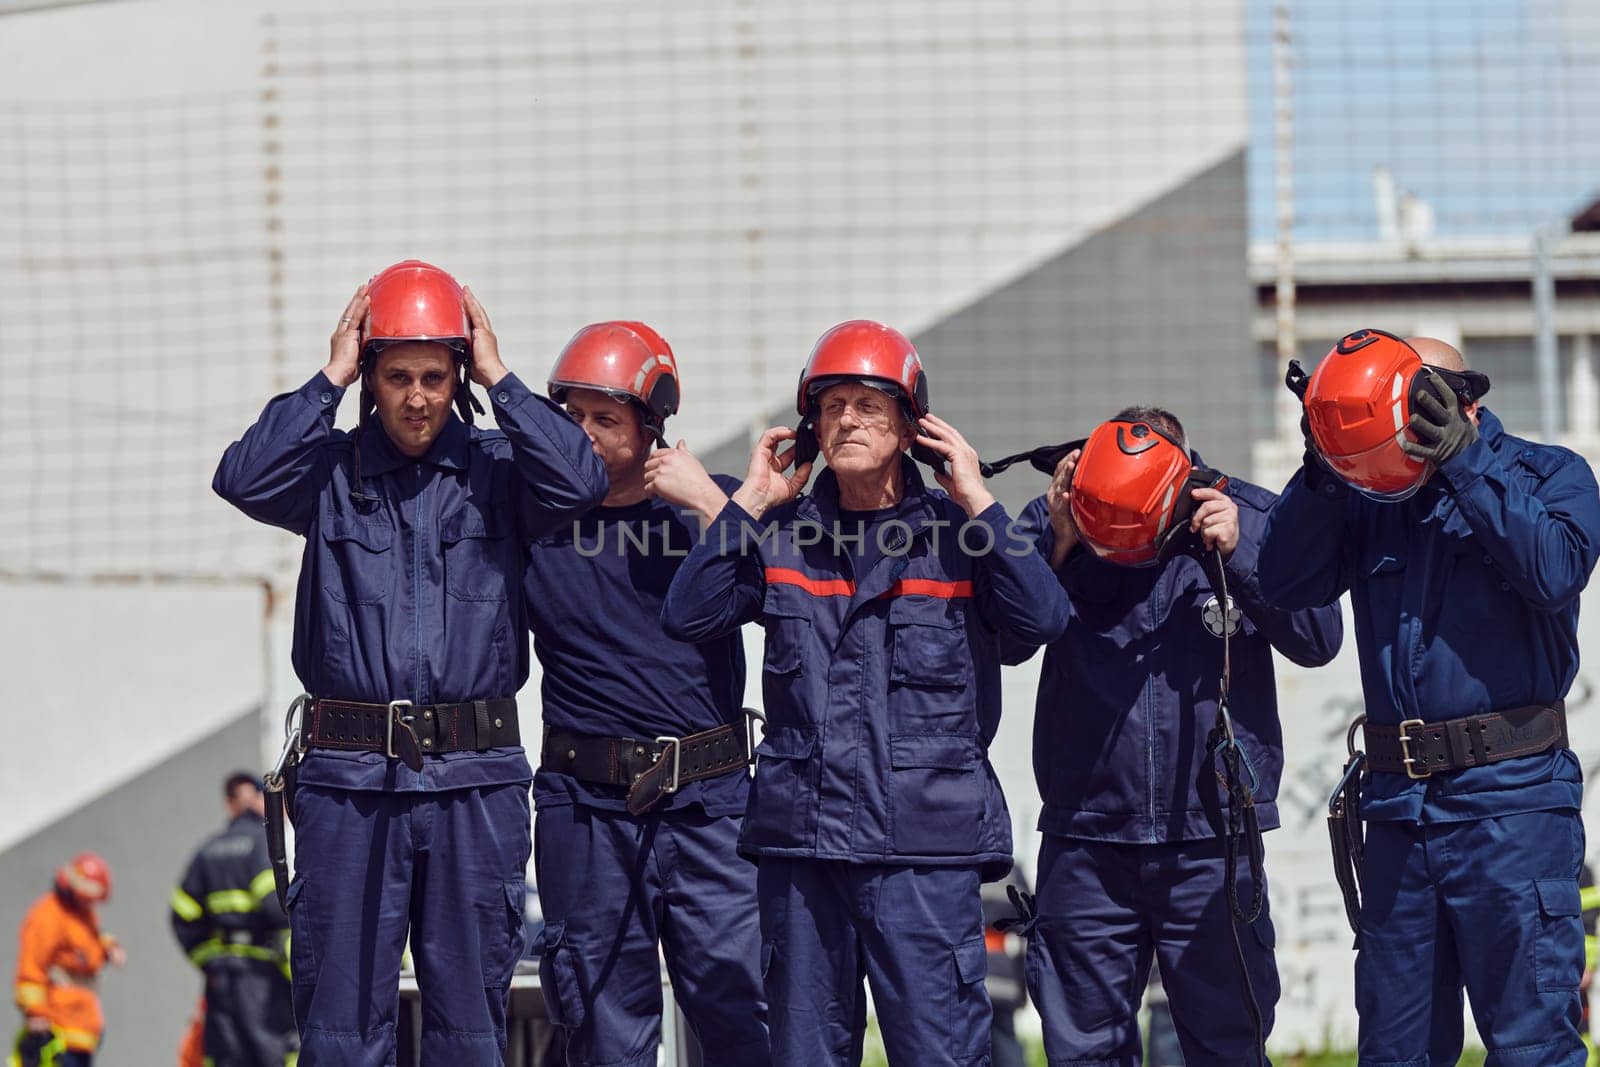 A team of confident and accomplished firefighters strides purposefully in their uniforms, exuding pride and satisfaction after successfully completing a challenging firefighting mission.